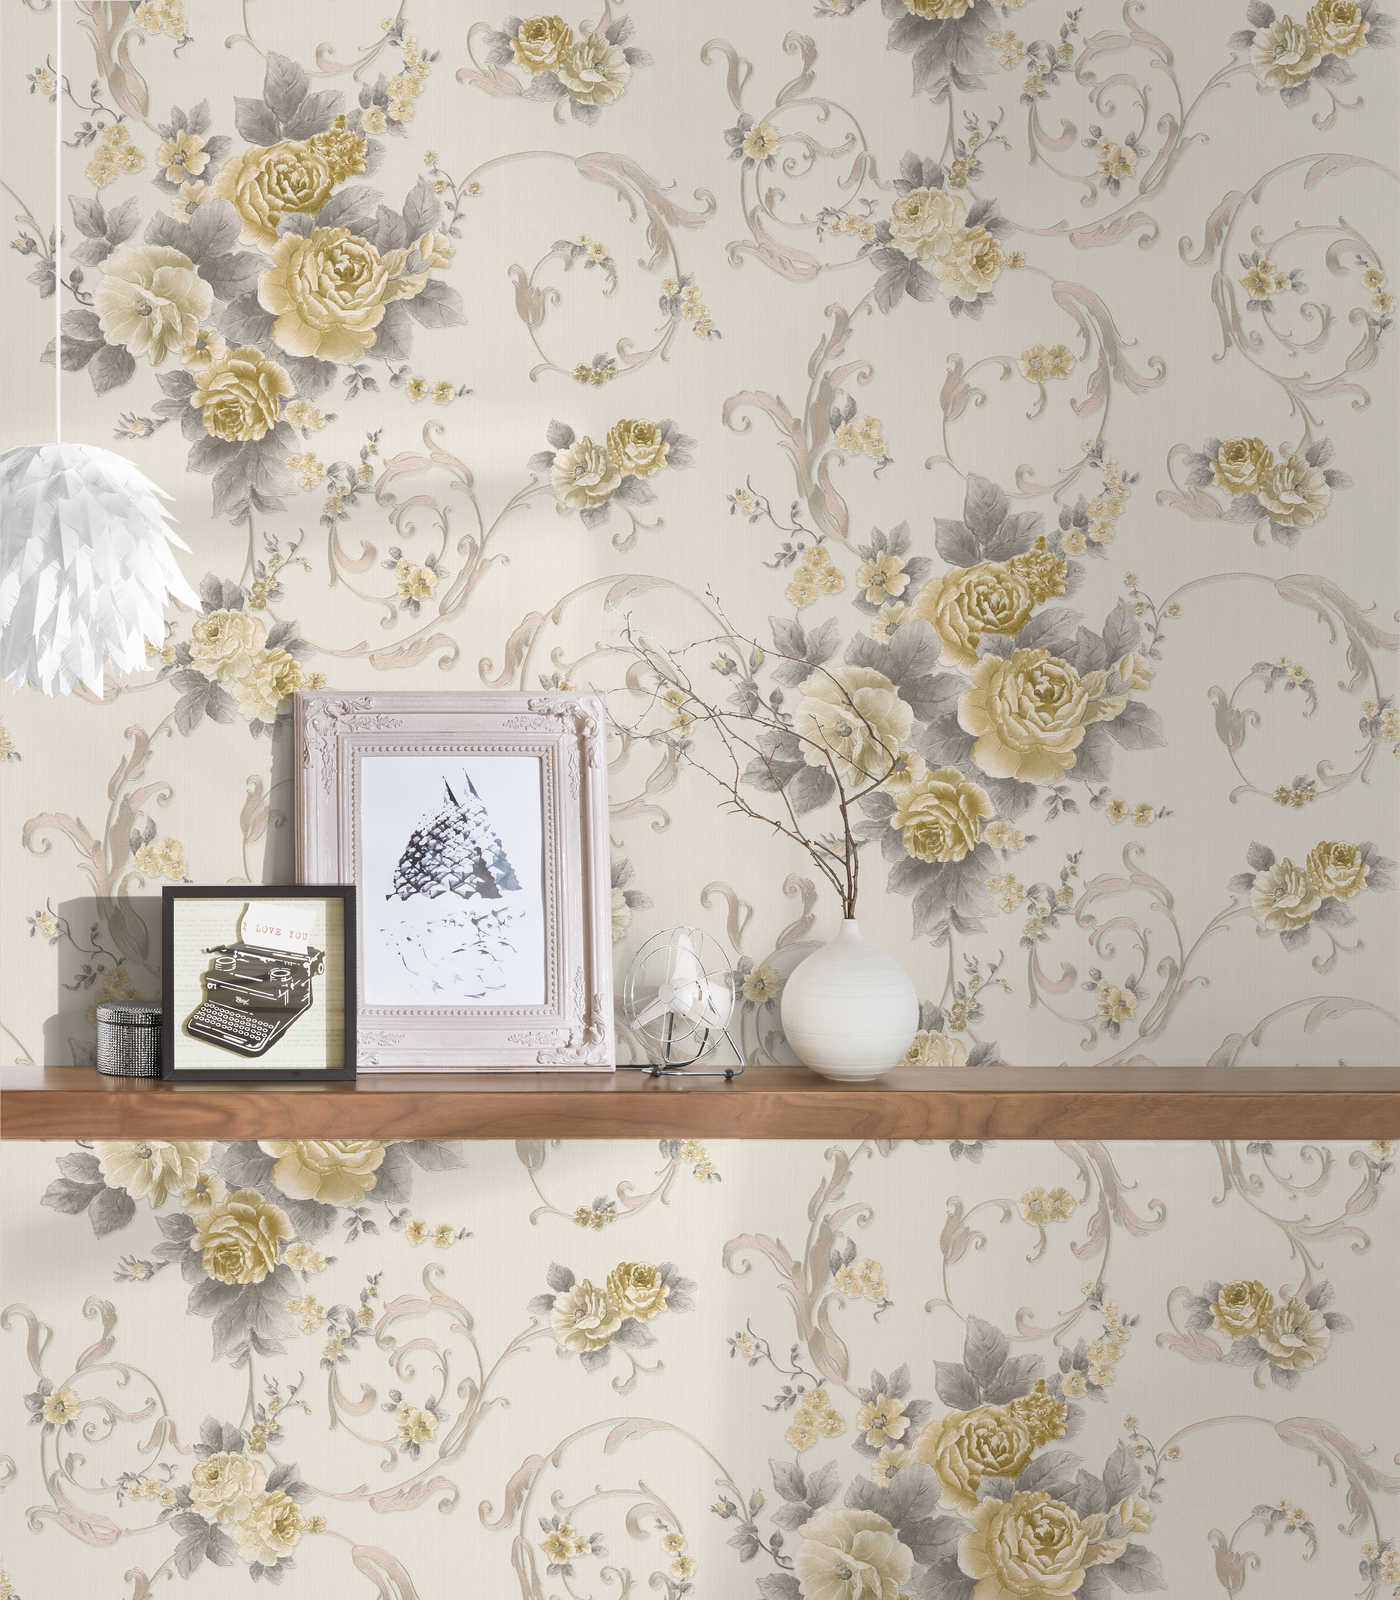             Rose petal wallpaper with metallic effect in country style - grey, gold, white
        